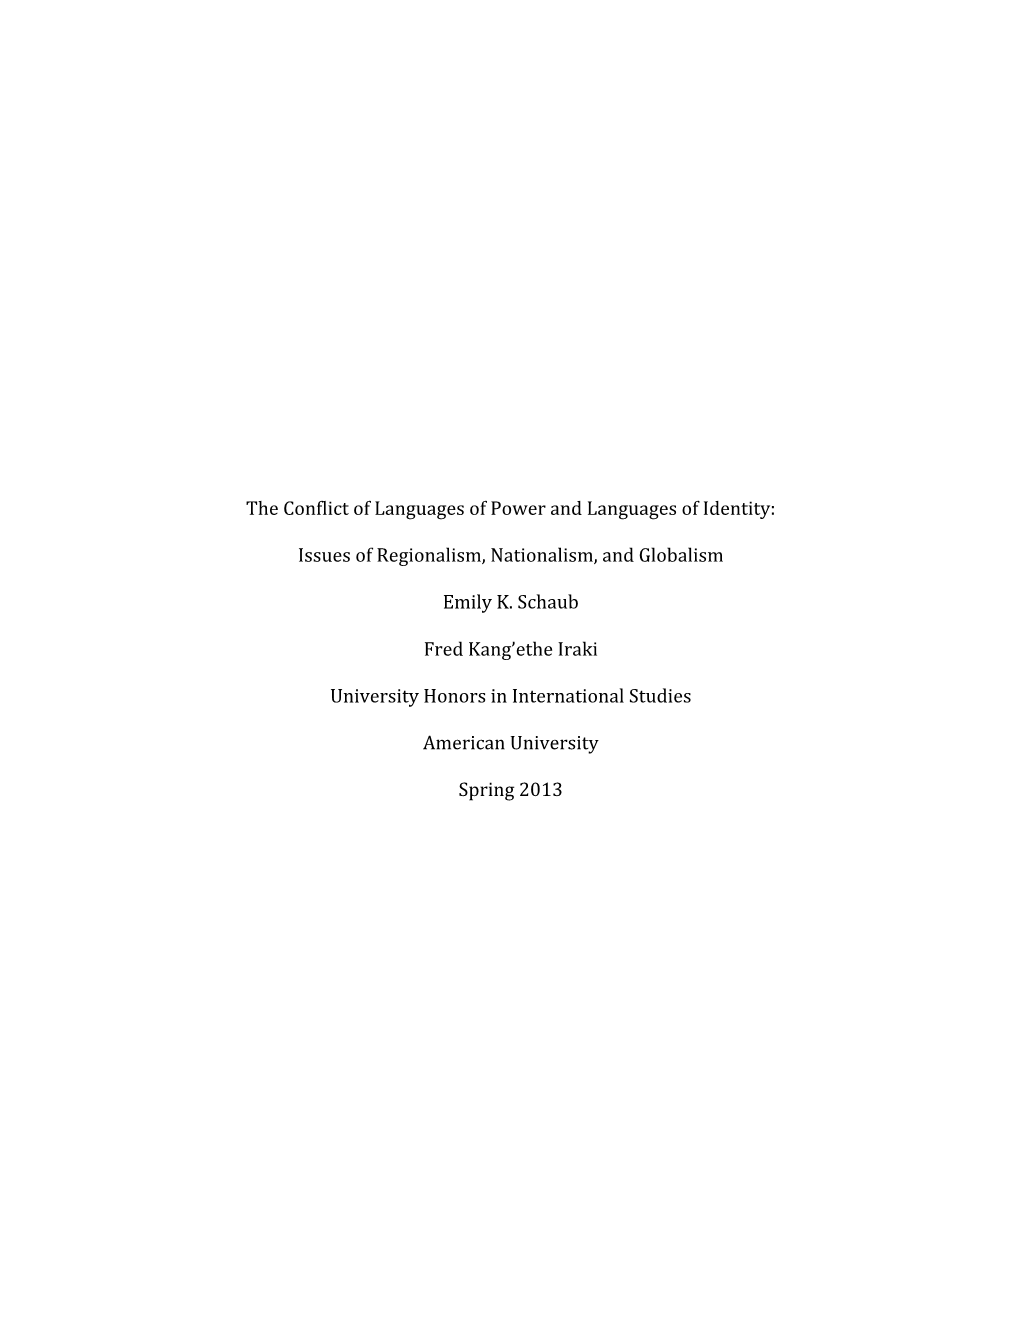 The Conflict of Languages of Power and Languages of Identity